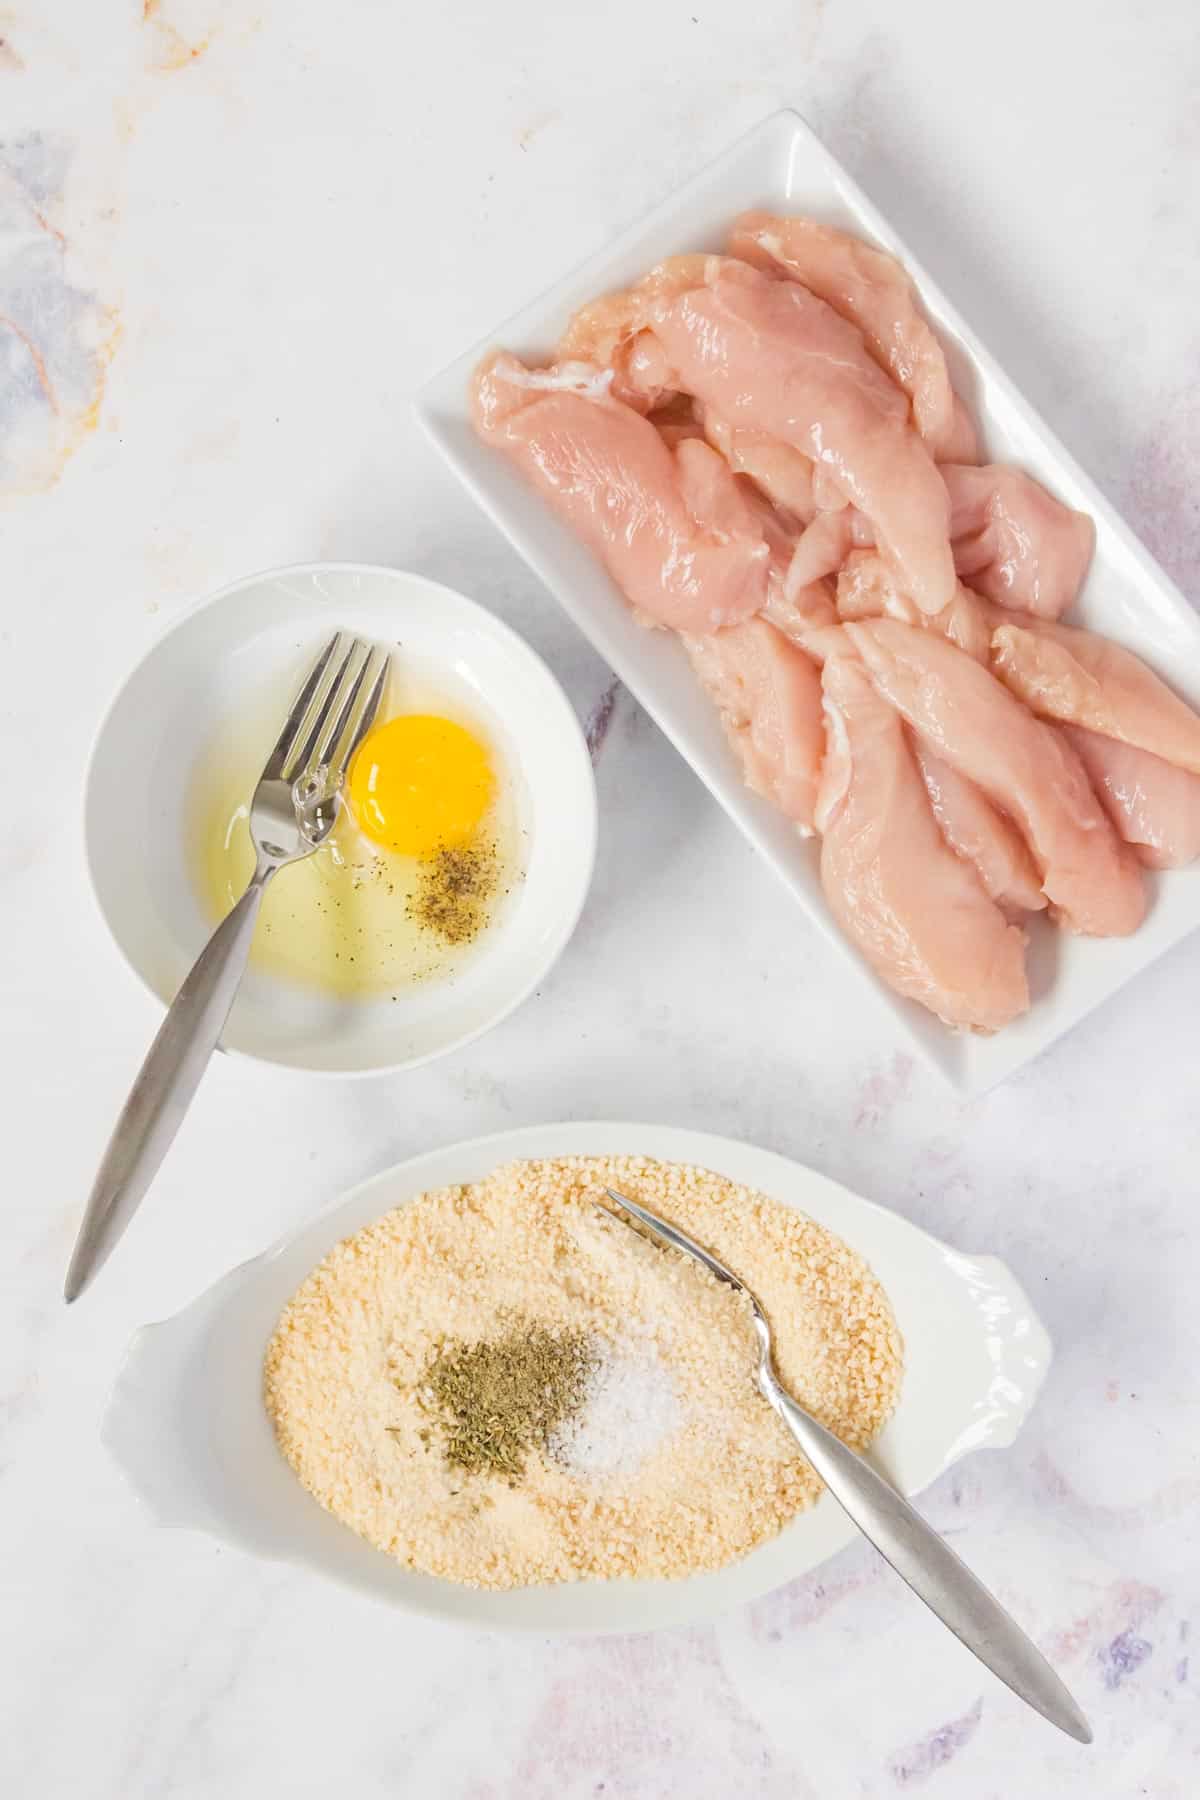 A rectangular platter of raw chicken strips, next to a dish filled with bread crumbs and seasoning, and a smaller bowl with an egg.